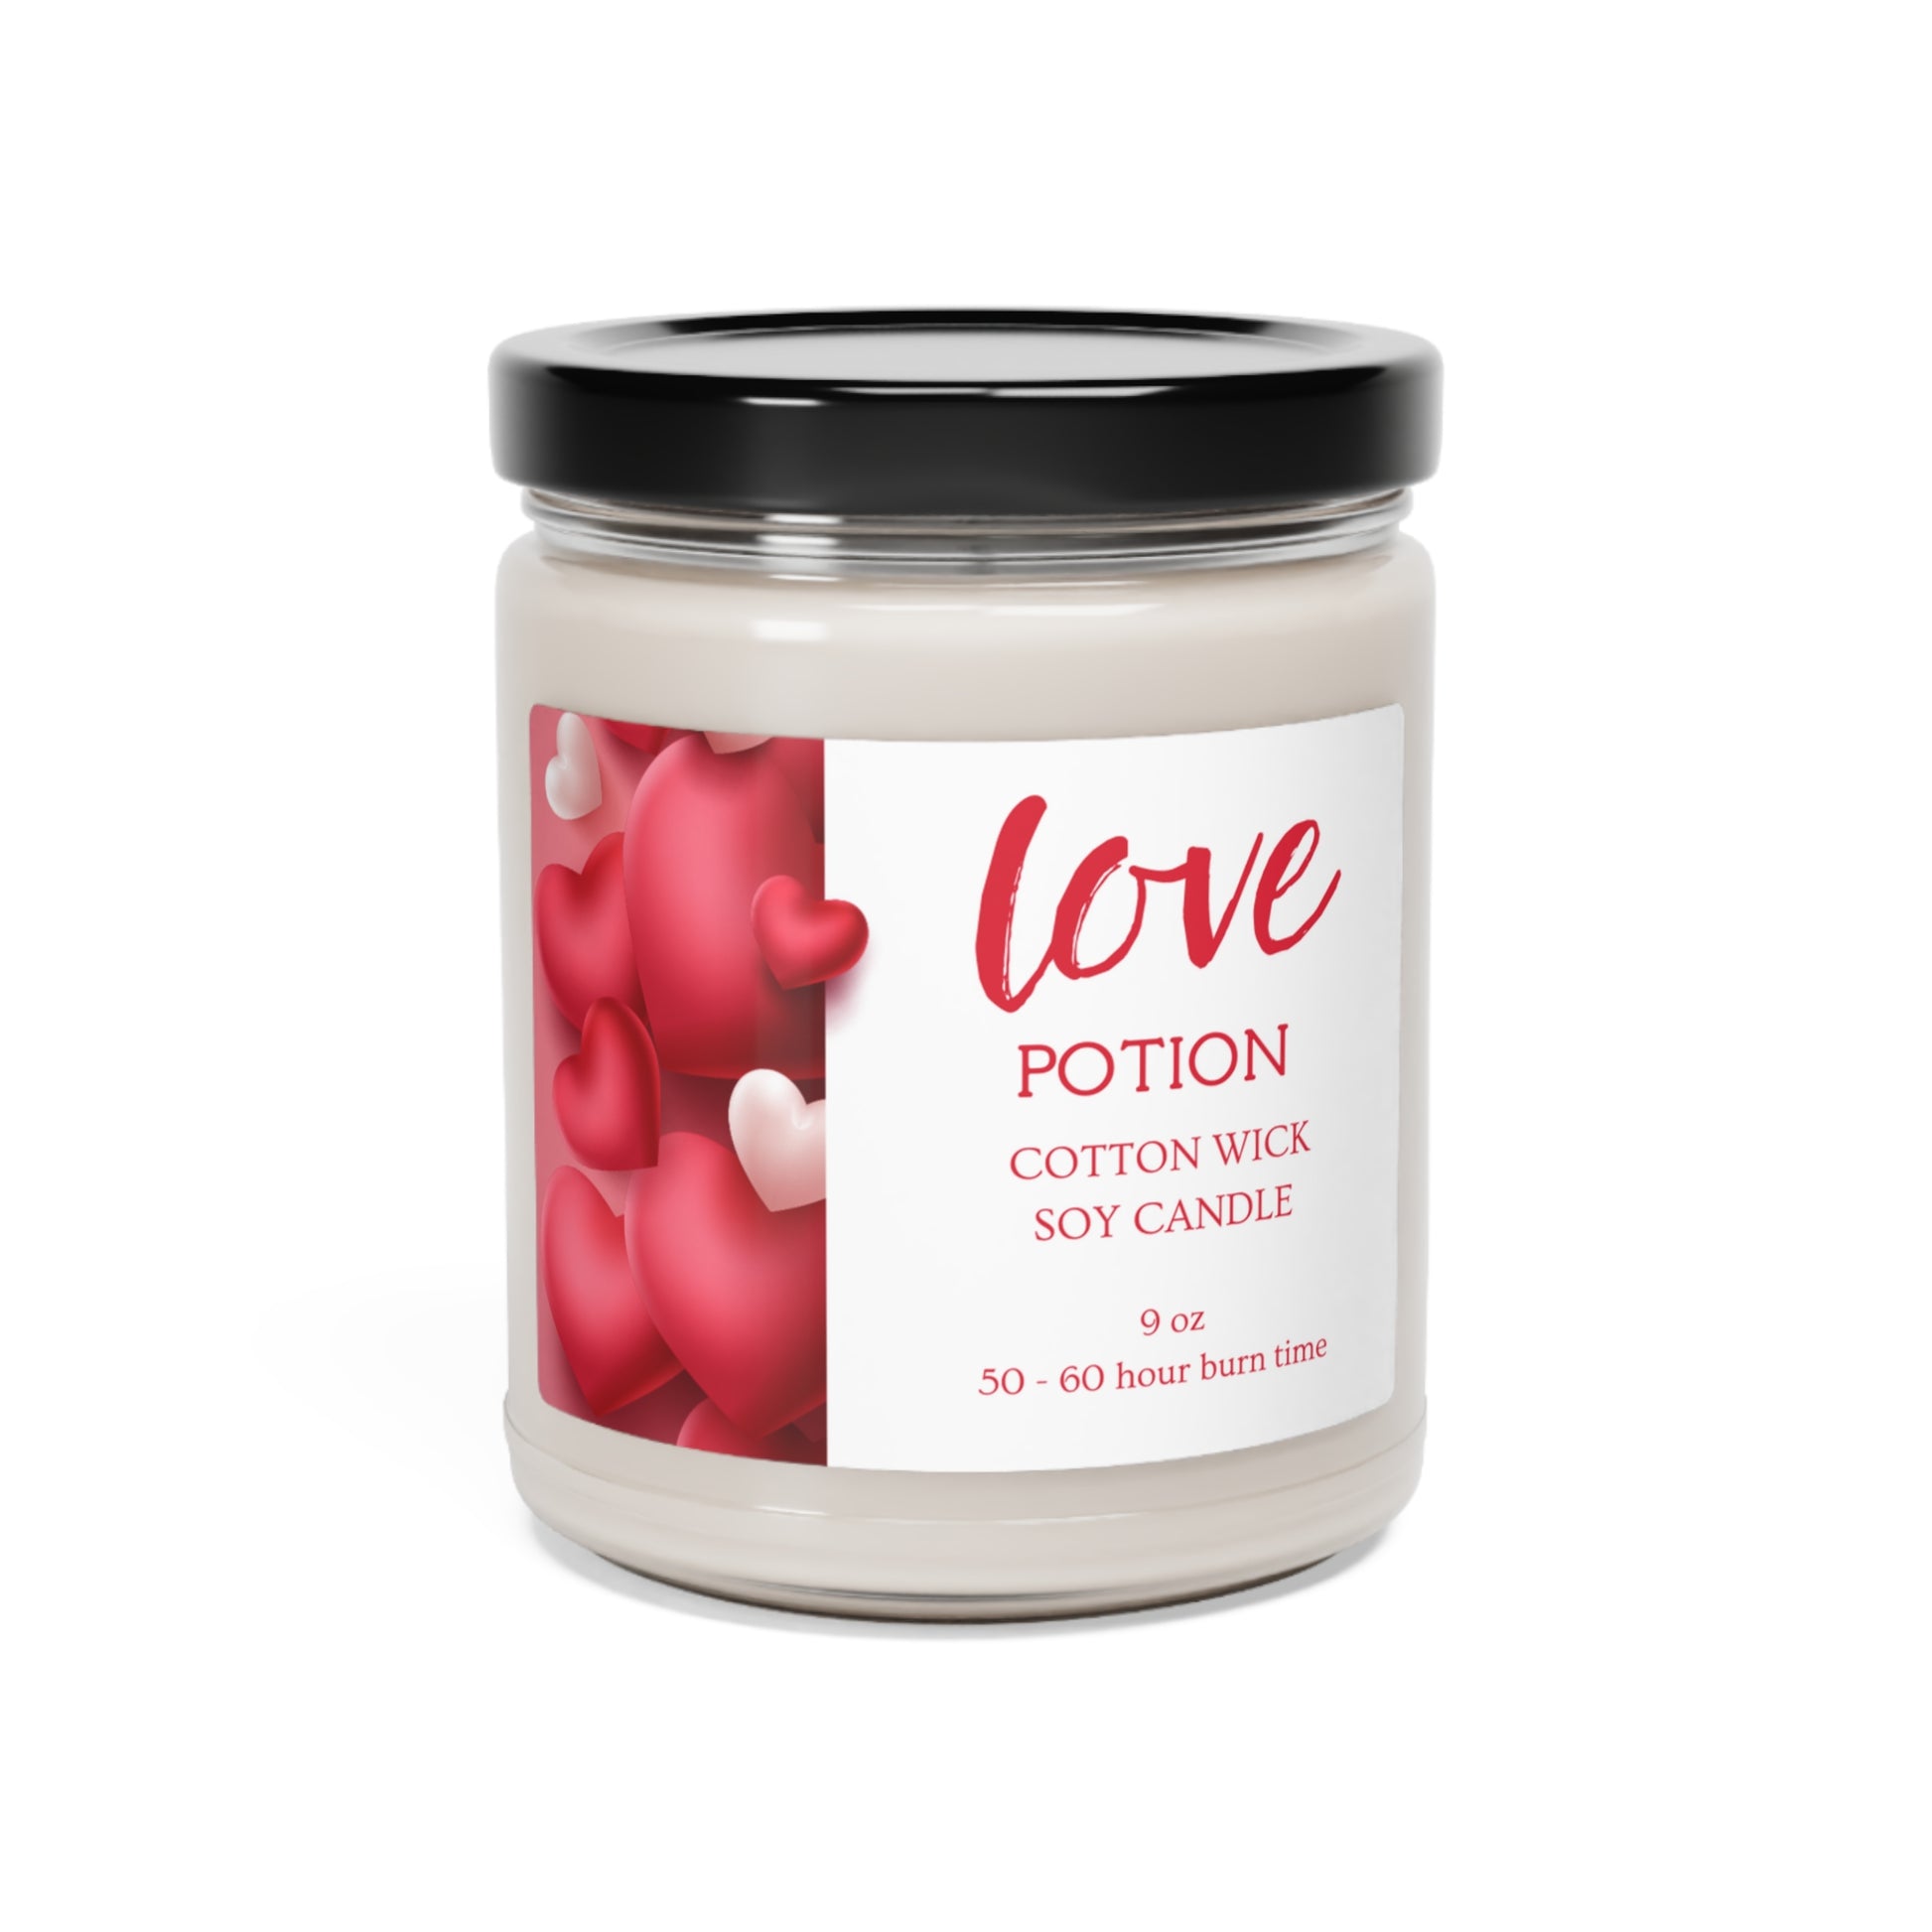 Valentine's Day Love Potion Soy Cotton Wick Candle - Mardonyx Candle Clean Cotton / 9oz